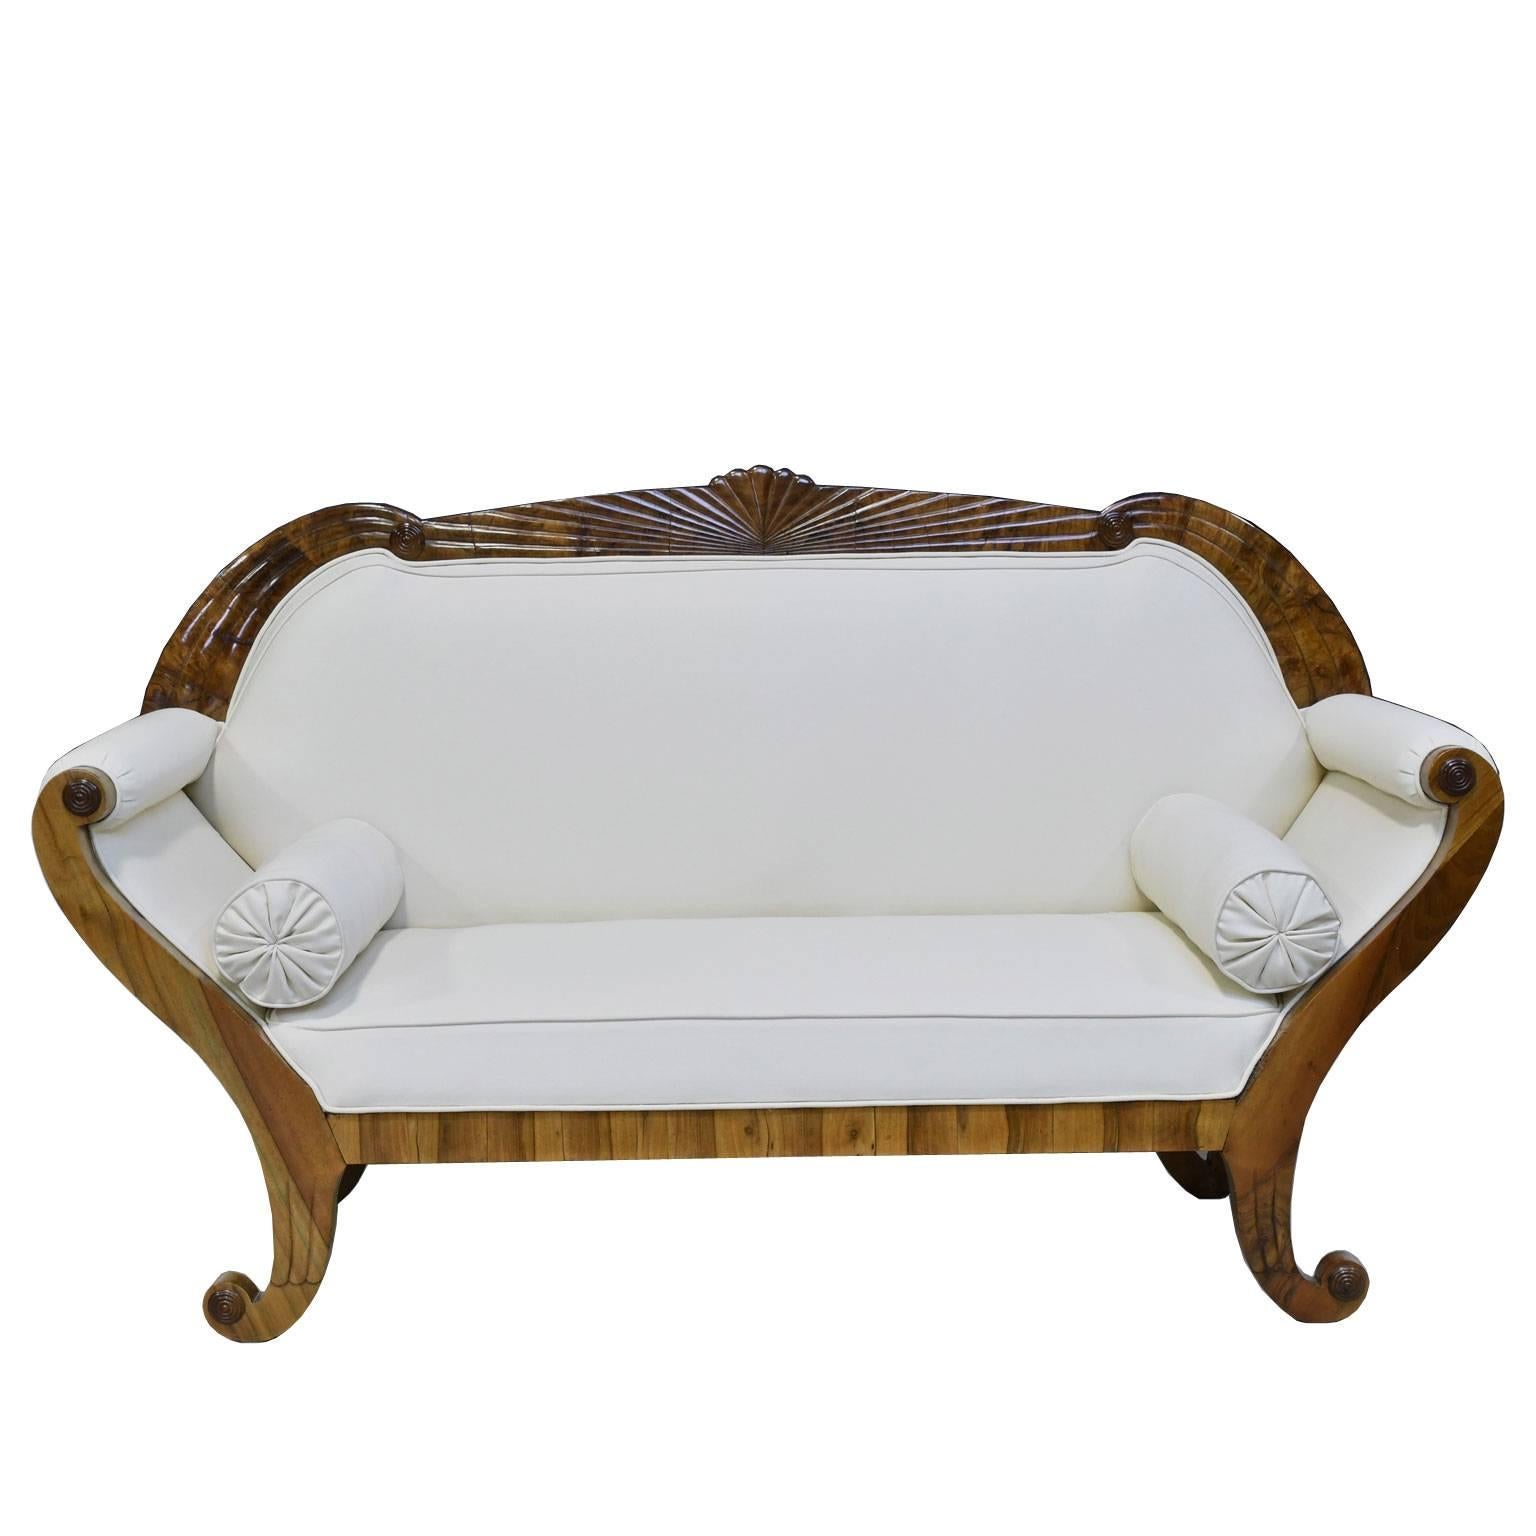 A very beautiful South German Biedermeier Sofa in fine walnut with shaped, fan-carved crest rail above scrolled armrests terminating in out-scrolled feet, Germany, circa 1830.
Note: This sofa is in very good to excellent condition and has been